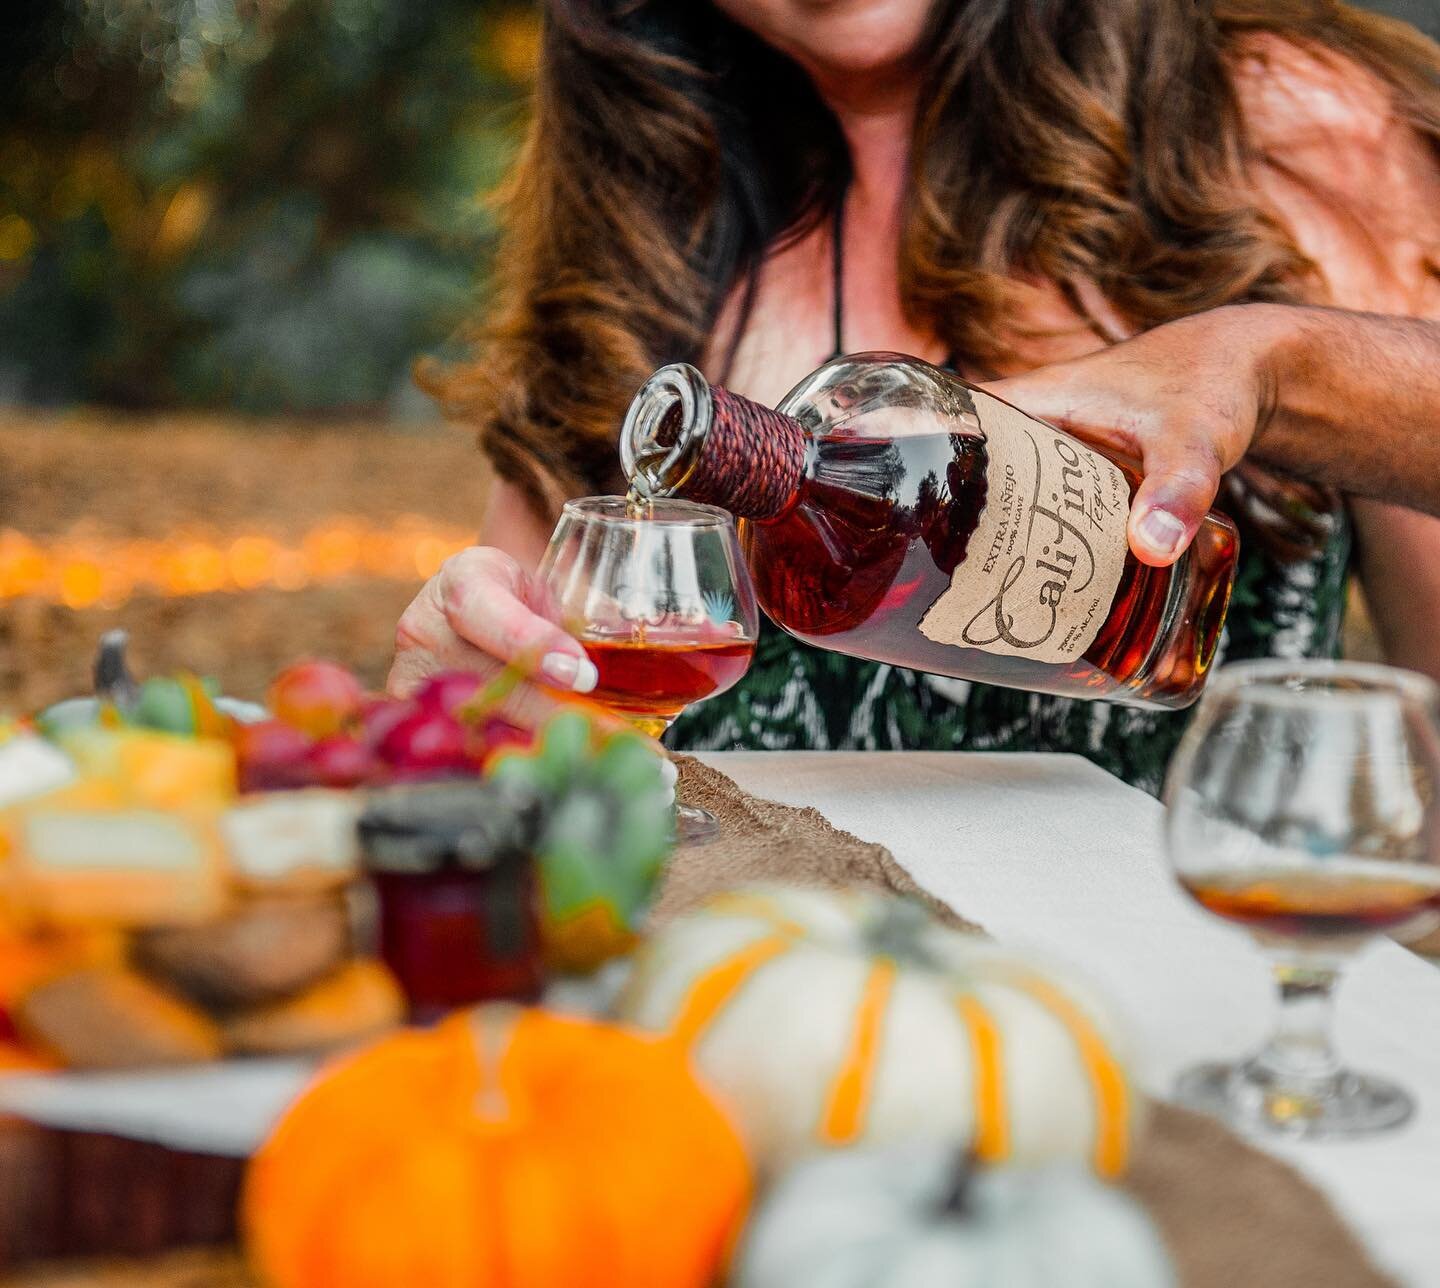 What are you #thankful for? We're grateful for our Fino family and, even better, great tequila! 🥧🍂 ⠀
- ⠀
- ⠀
- ⠀
#fall #autumn #nature #halloween #love #winter #fashion #photography #summer #october #instagood #spring #pumpkin #travel #leaves #phot